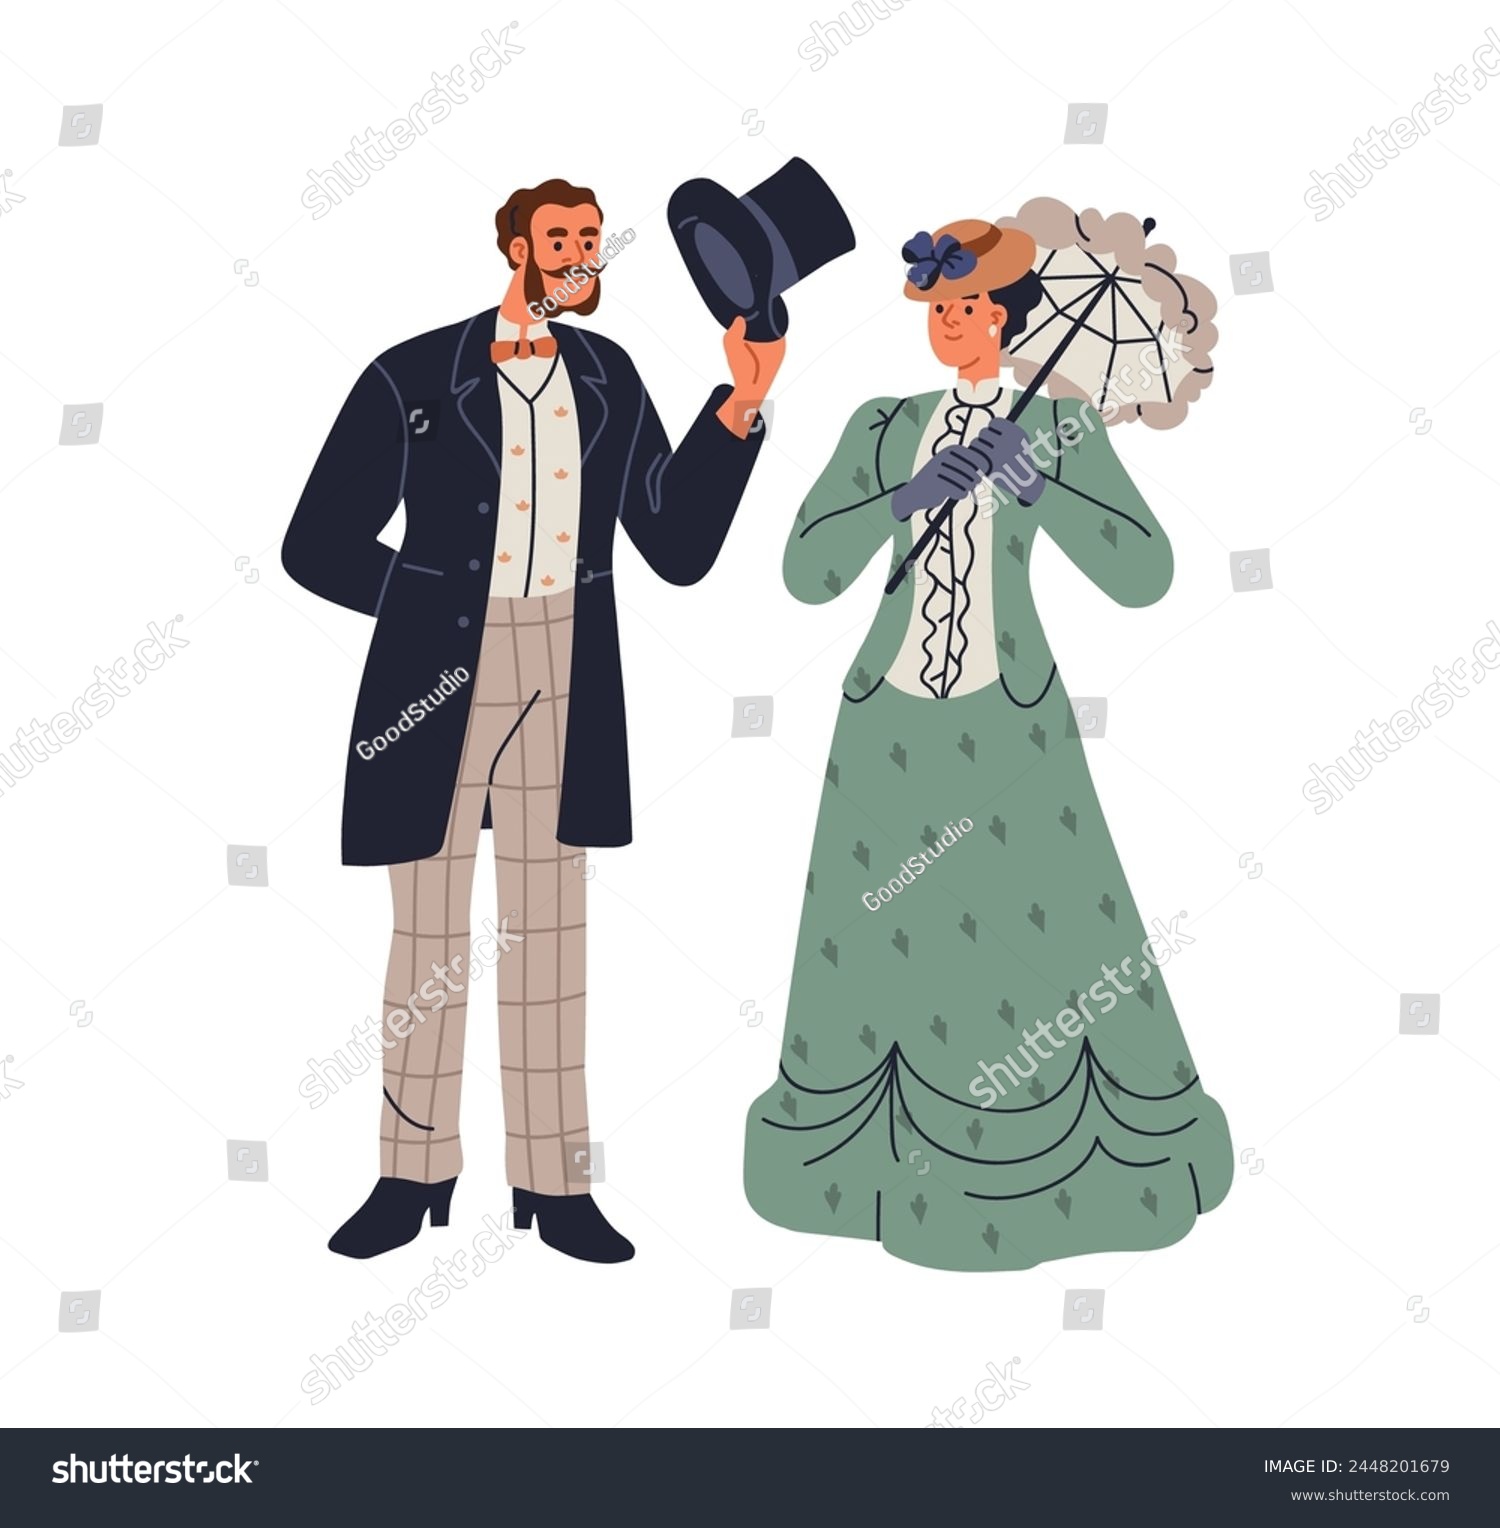 Gentleman and lady dressed in 18th and 19th century clothes. Aristocrats, noble people in historic victorian era. Nobleman greeting noblewoman. Flat vector illustration isolated on white background #2448201679